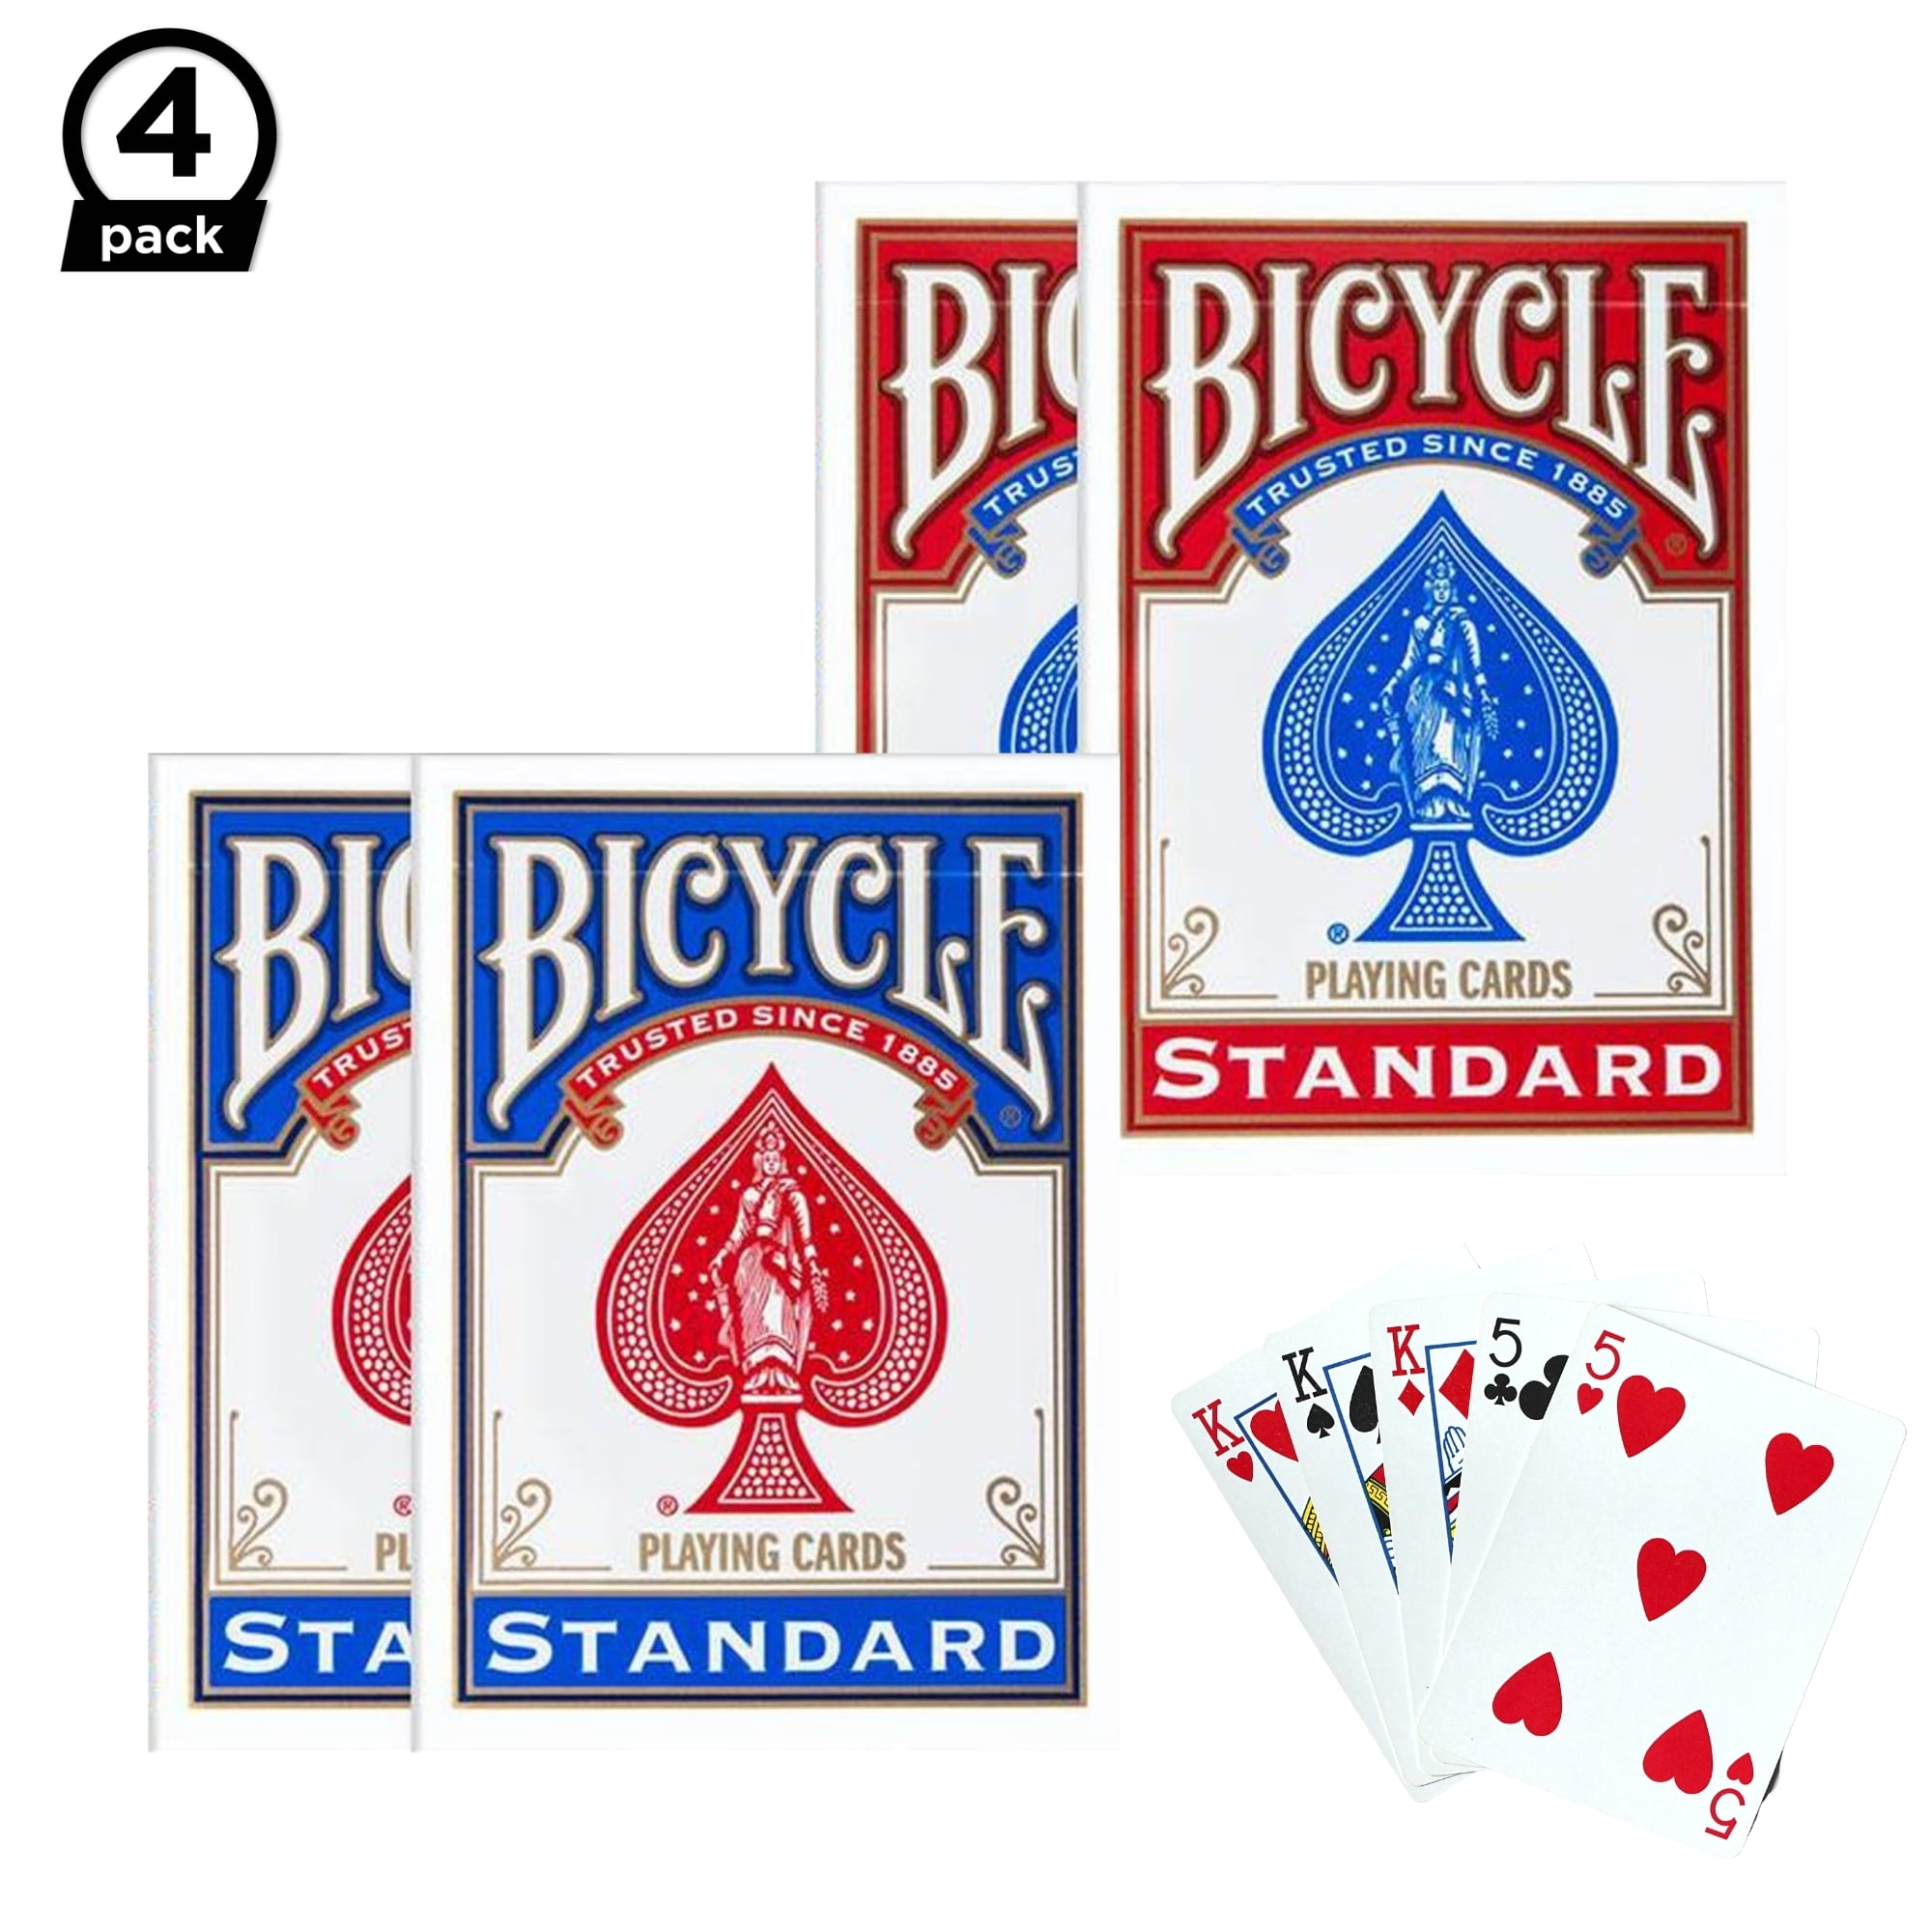 Bicycle Rider Back Poker 808 Single Deck Playing Cards Texas Hold'em Rules blue 